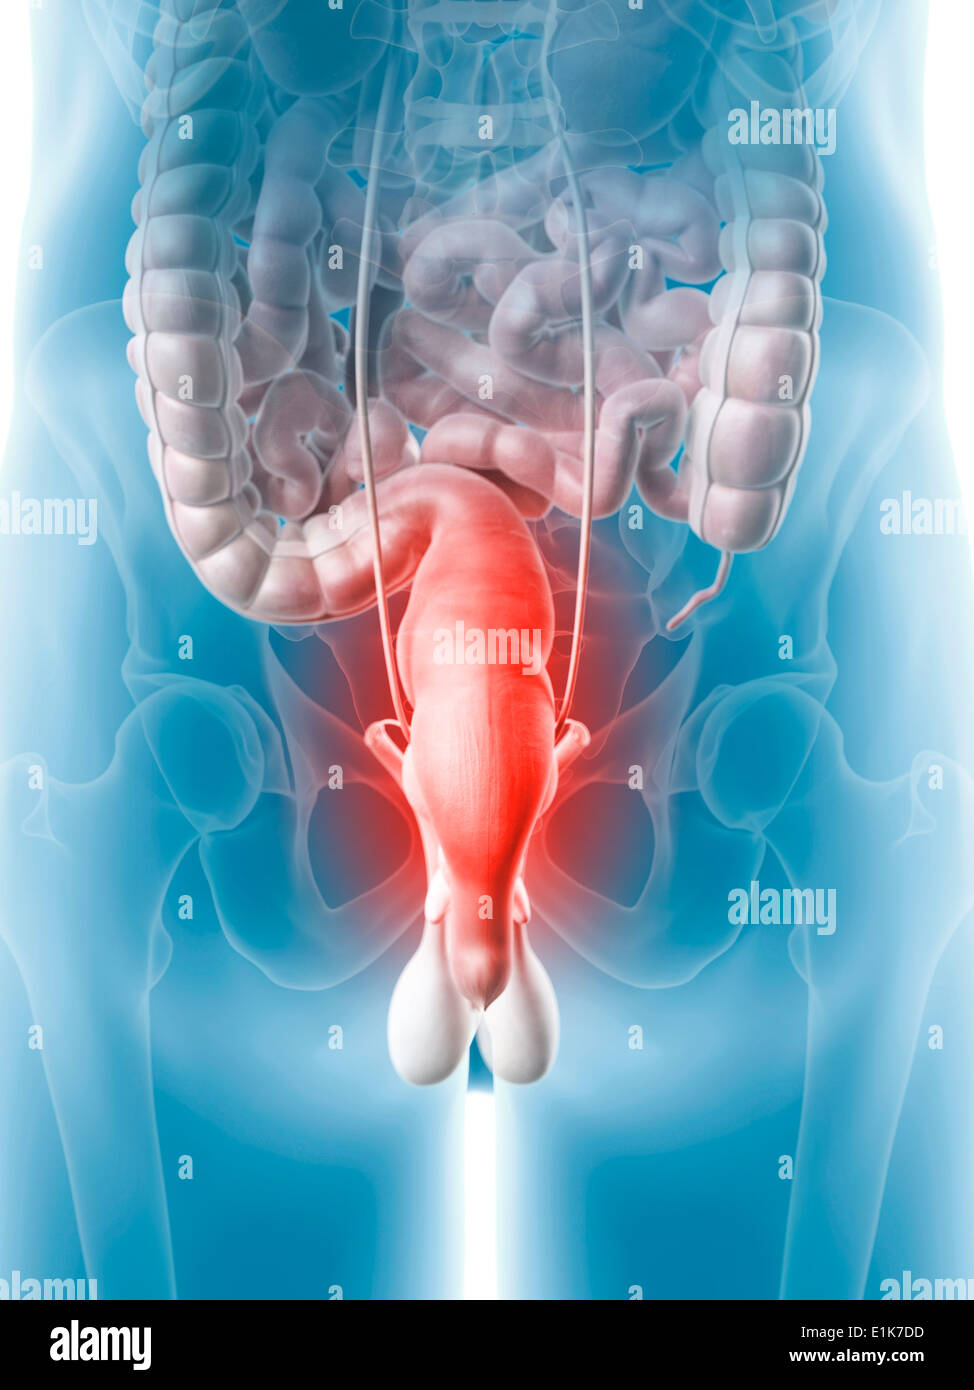 Inflamed rectum computer artwork. Stock Photo